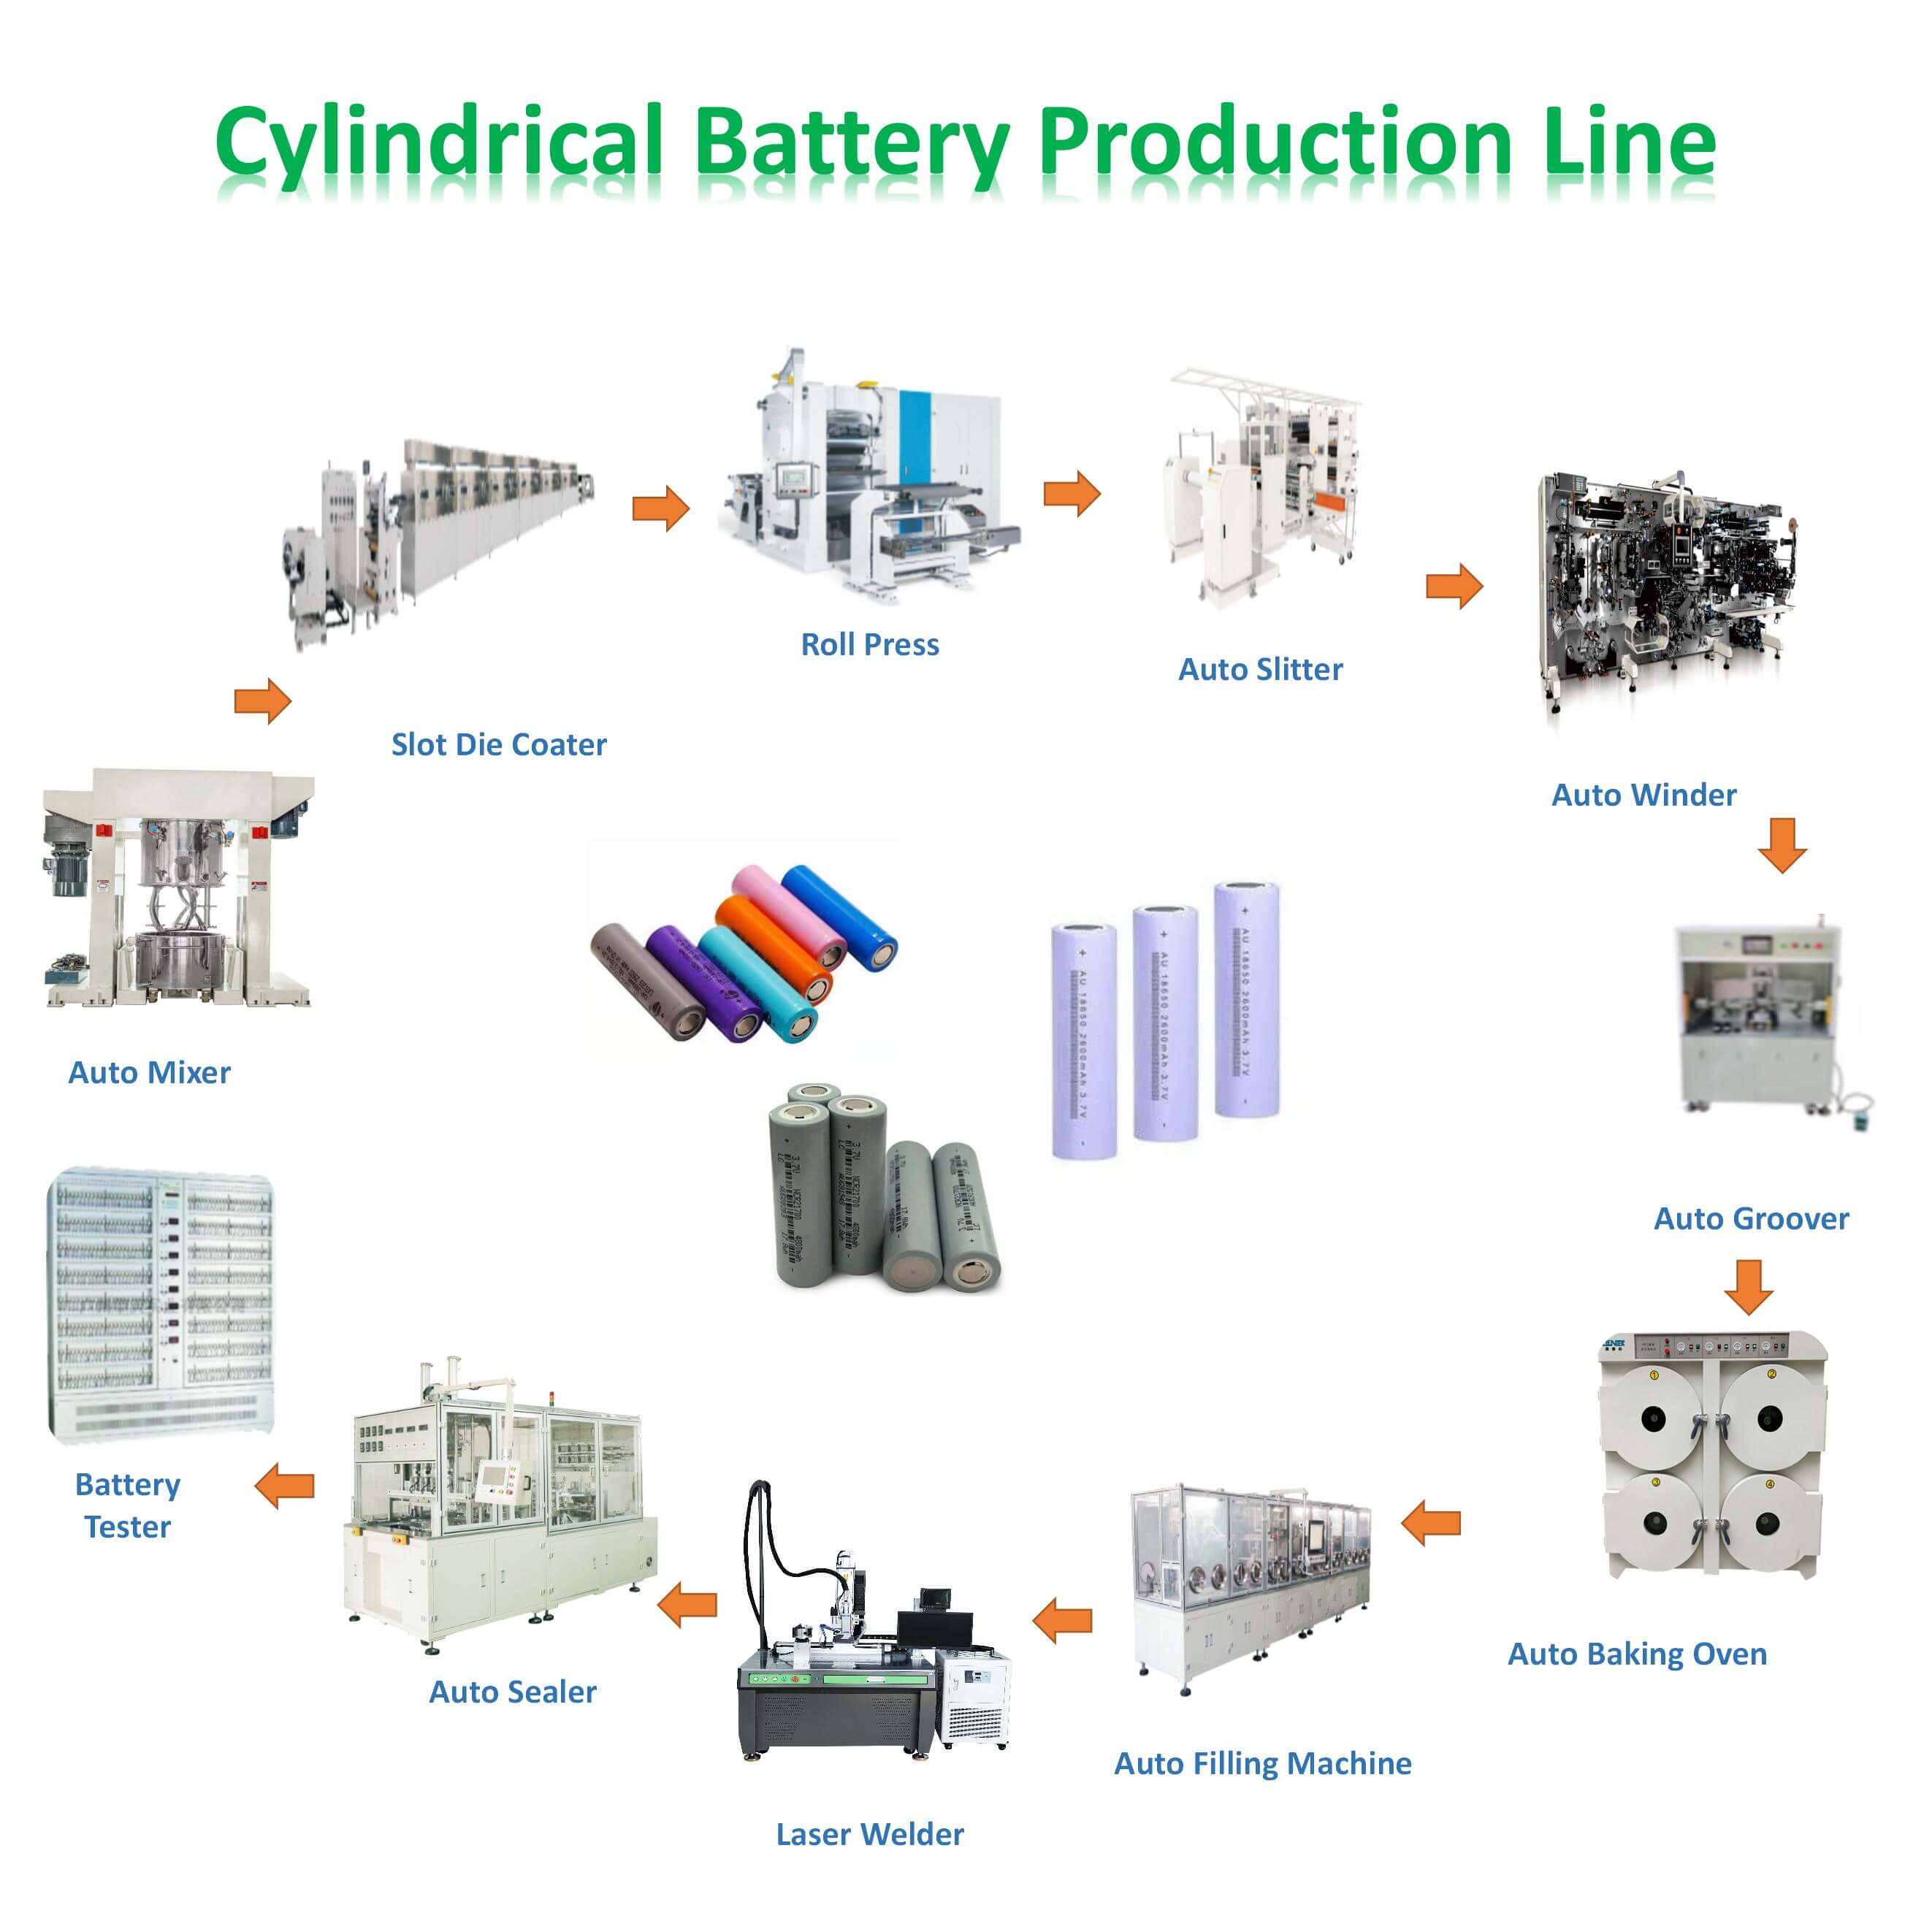 Cylinidrical Battery Production Line